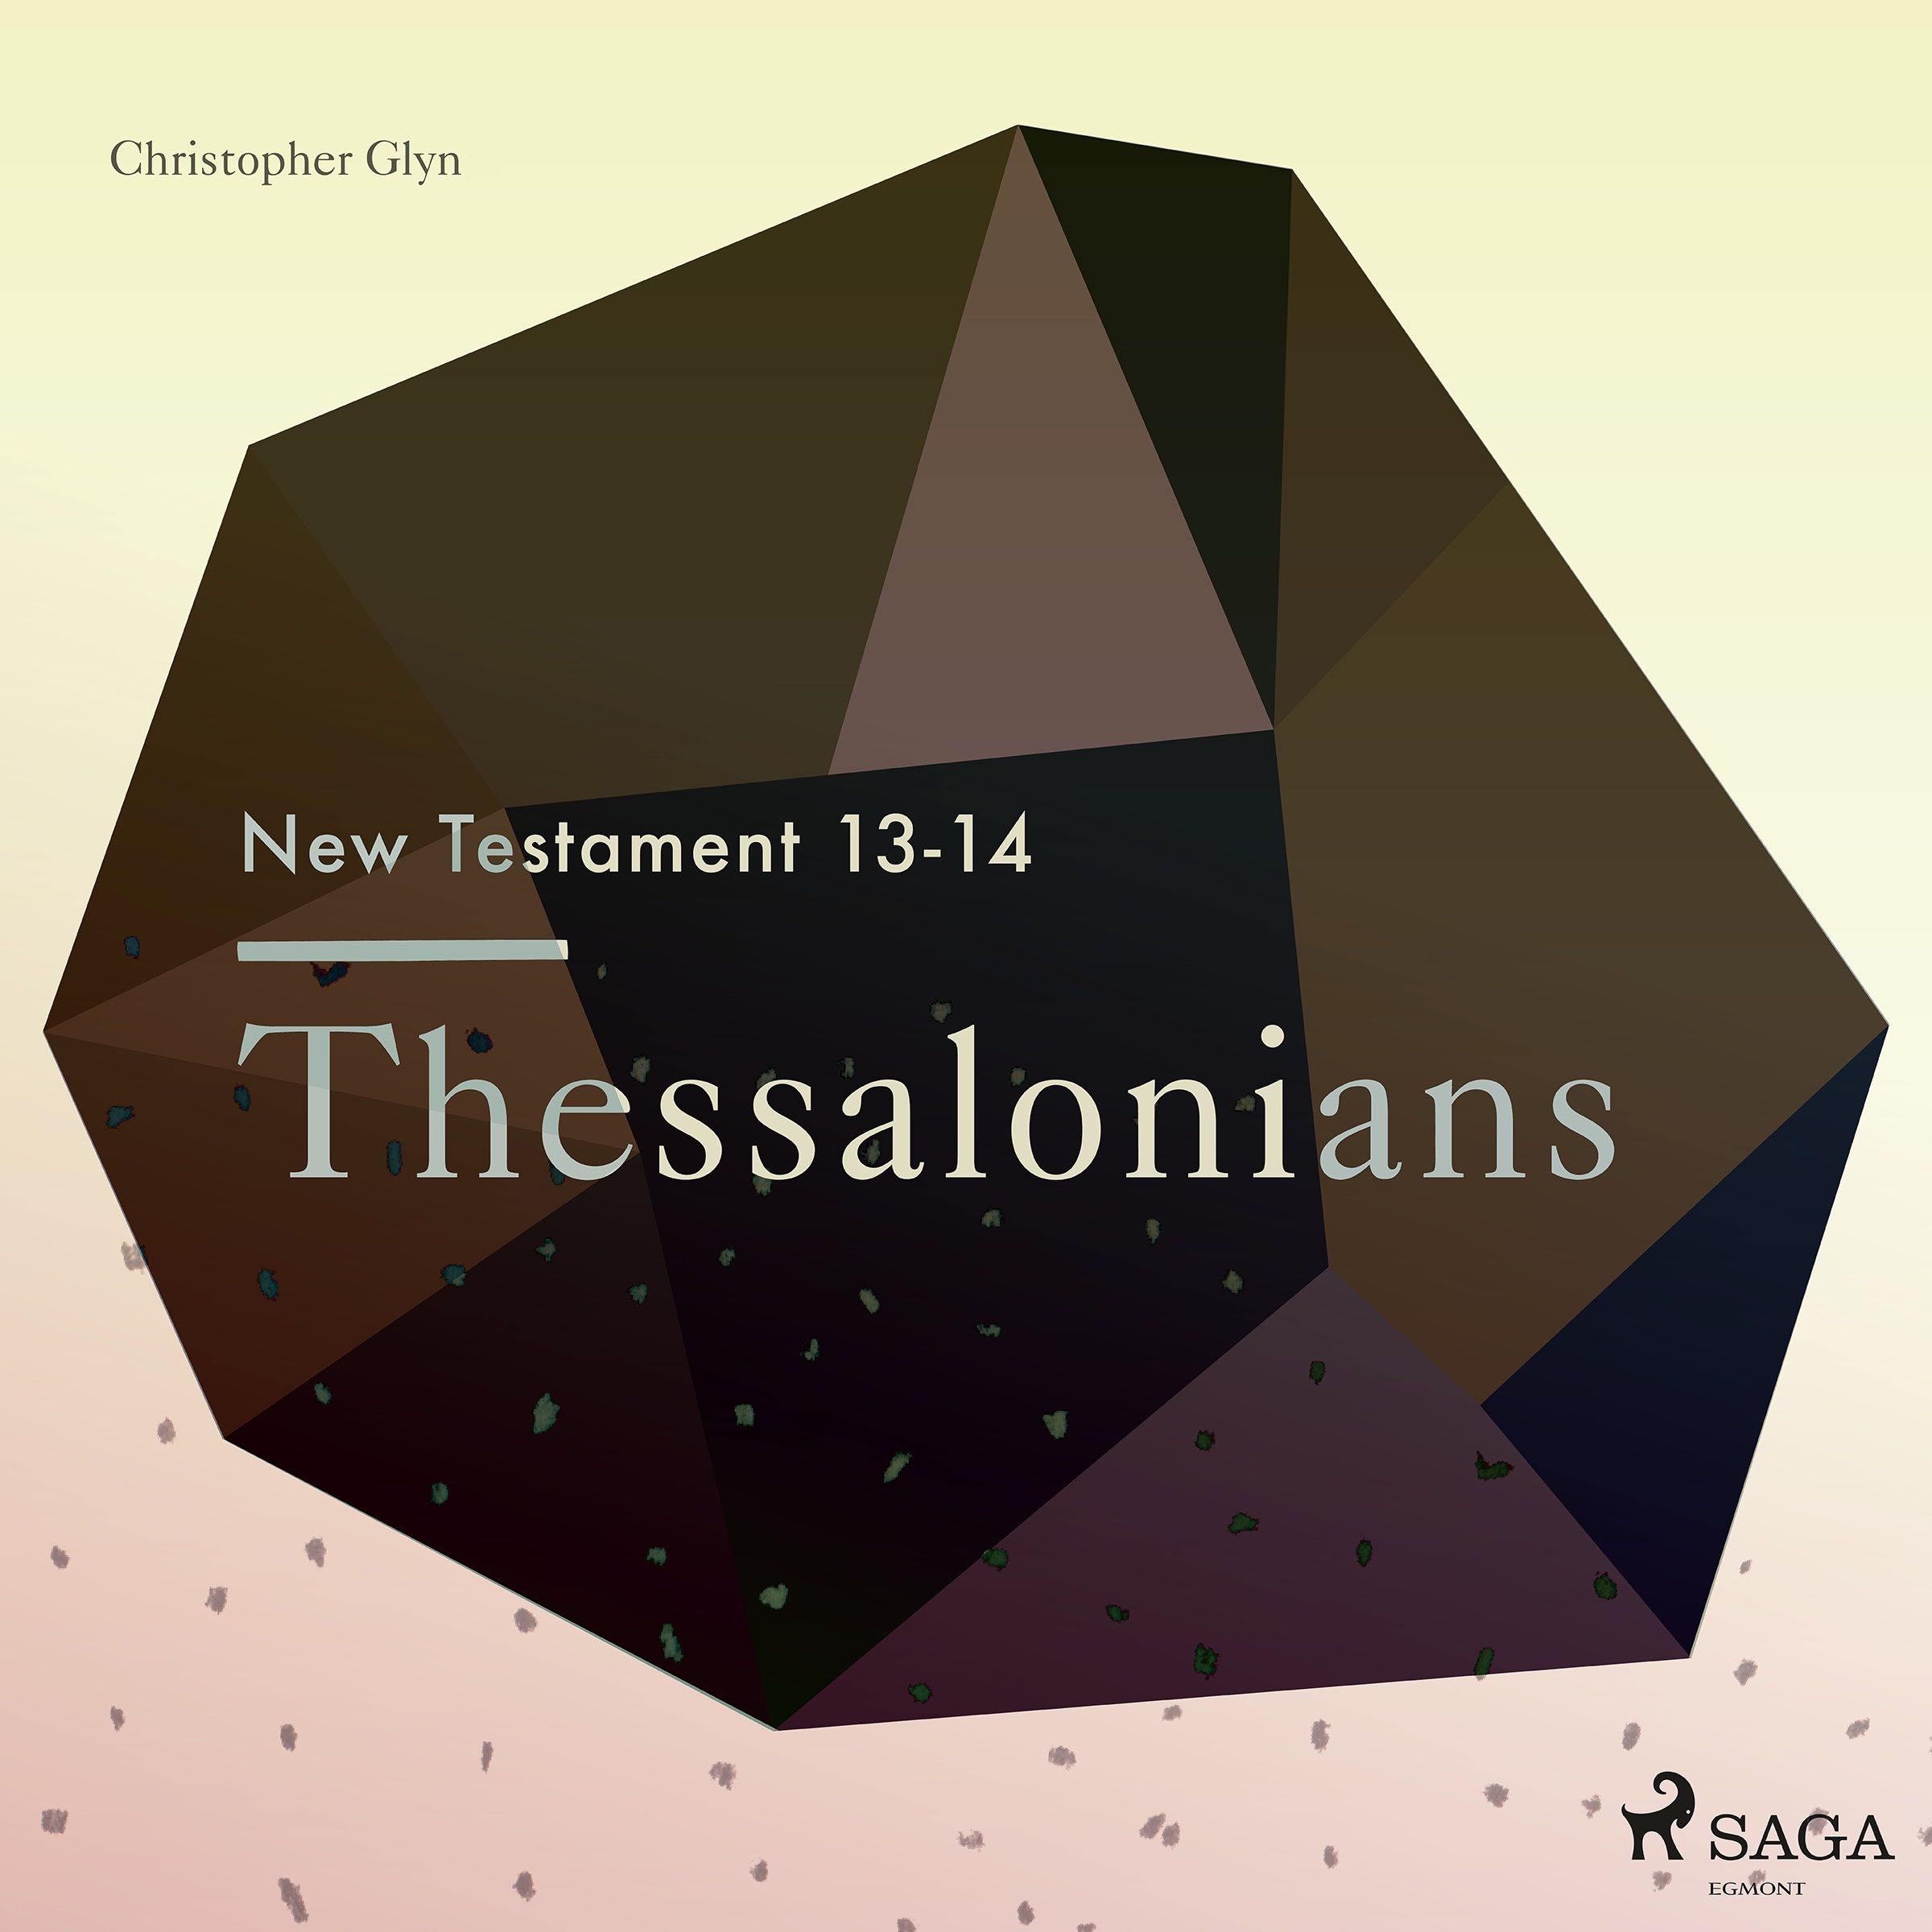 The New Testament 13-14 - Thessalonians, audiobook by Christopher Glyn